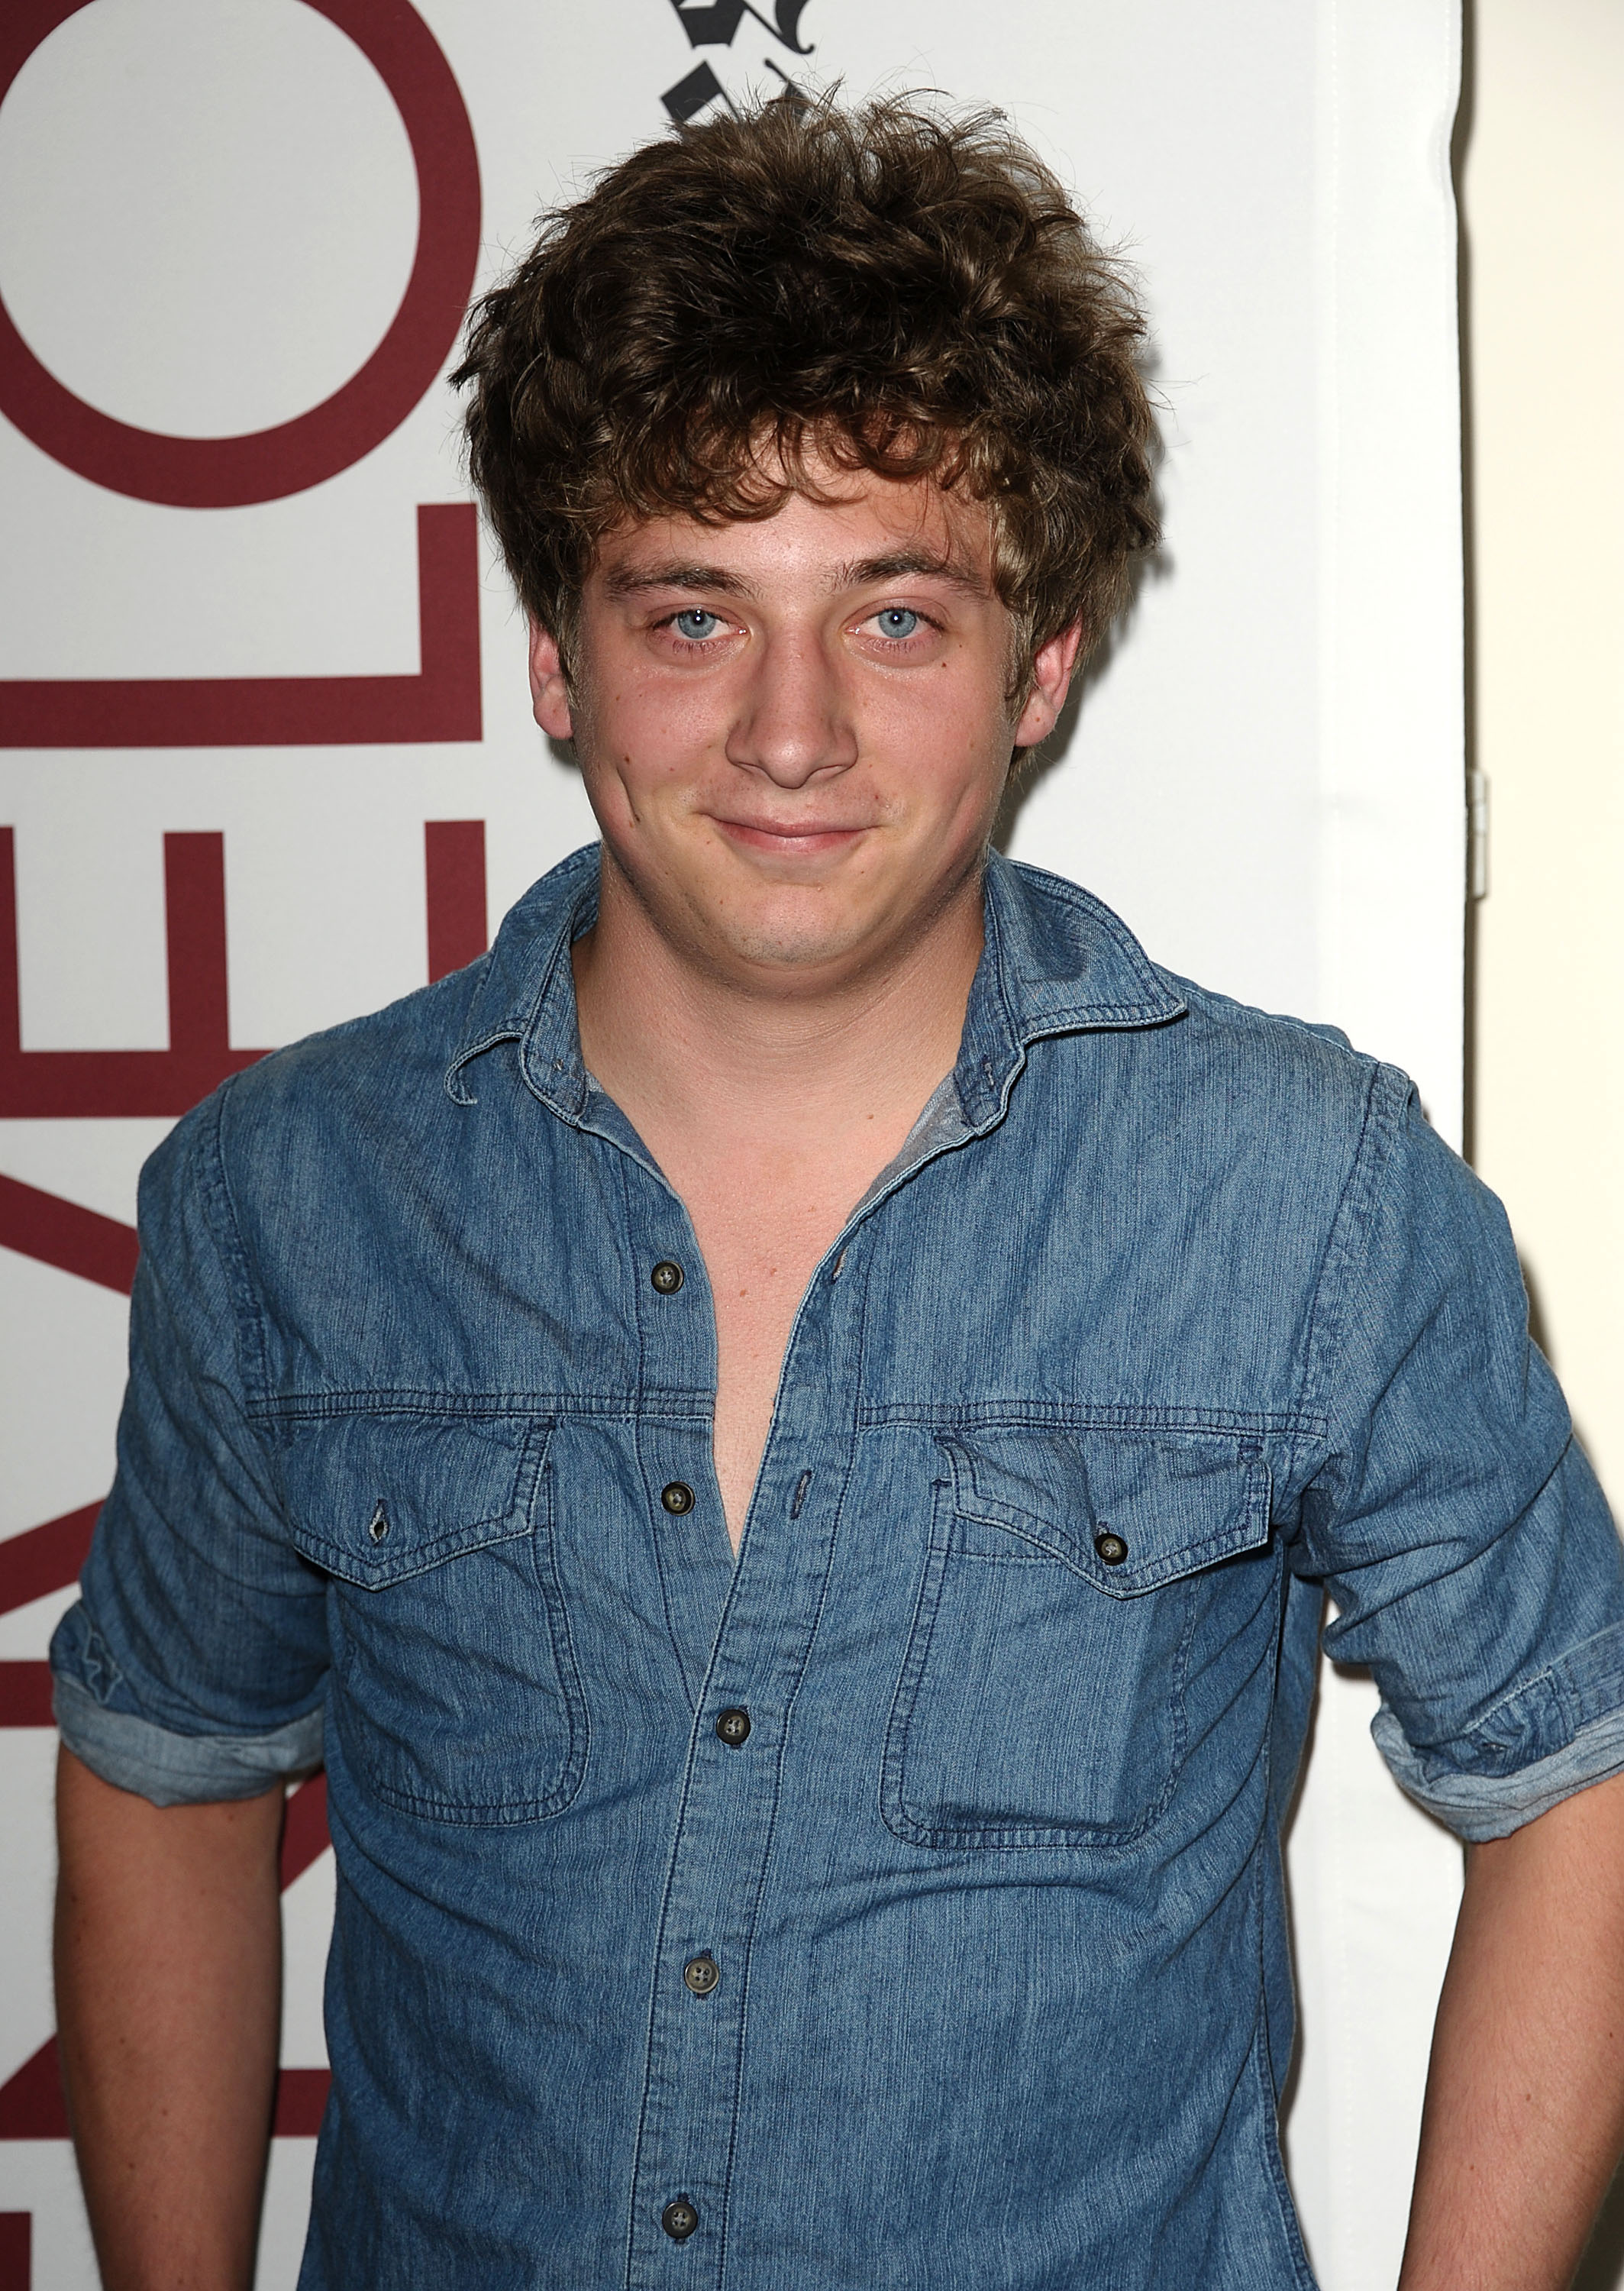 Jeremy Allen White attends the "Shameless" screening at Los Angeles Times' 3rd annual The Envelope primetime Emmy screening series at Regal Cinemas L.A. Live on June 2, 2011 in Los Angeles, California | Source: Getty Images